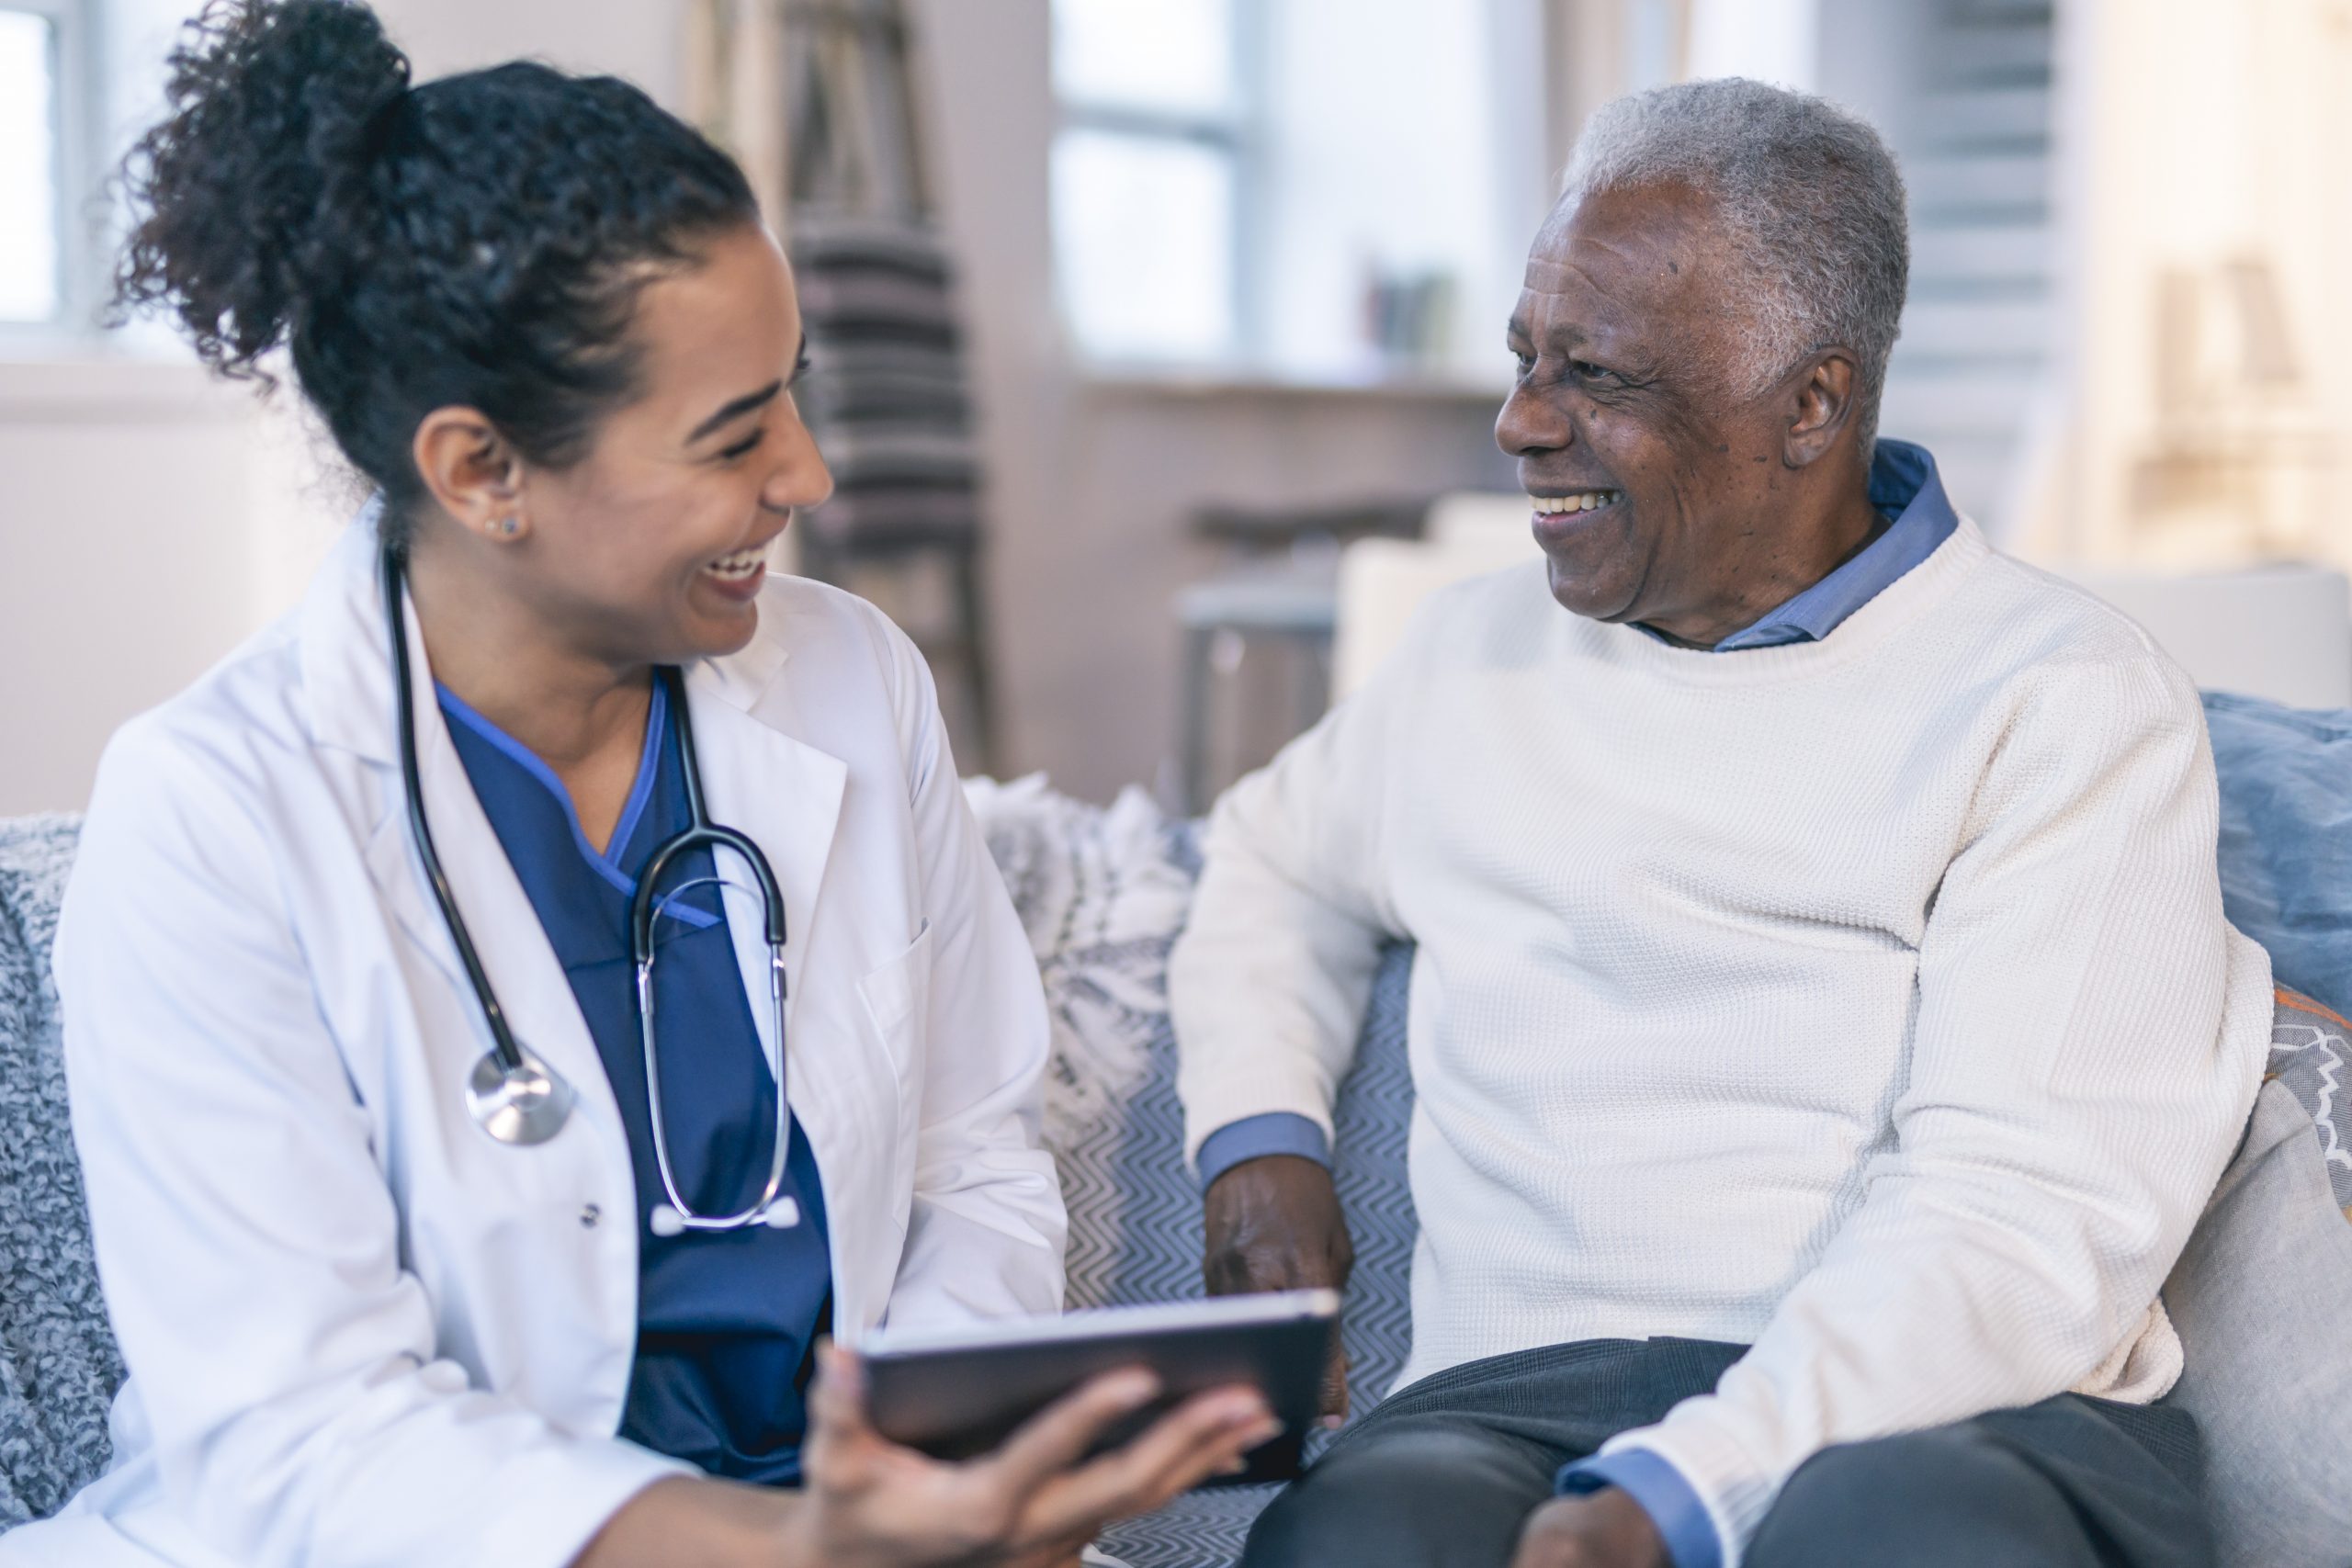 Microsoft introduces new data and AI solutions to help healthcare  organizations unlock insights and improve patient and clinician experiences  - The Official Microsoft Blog